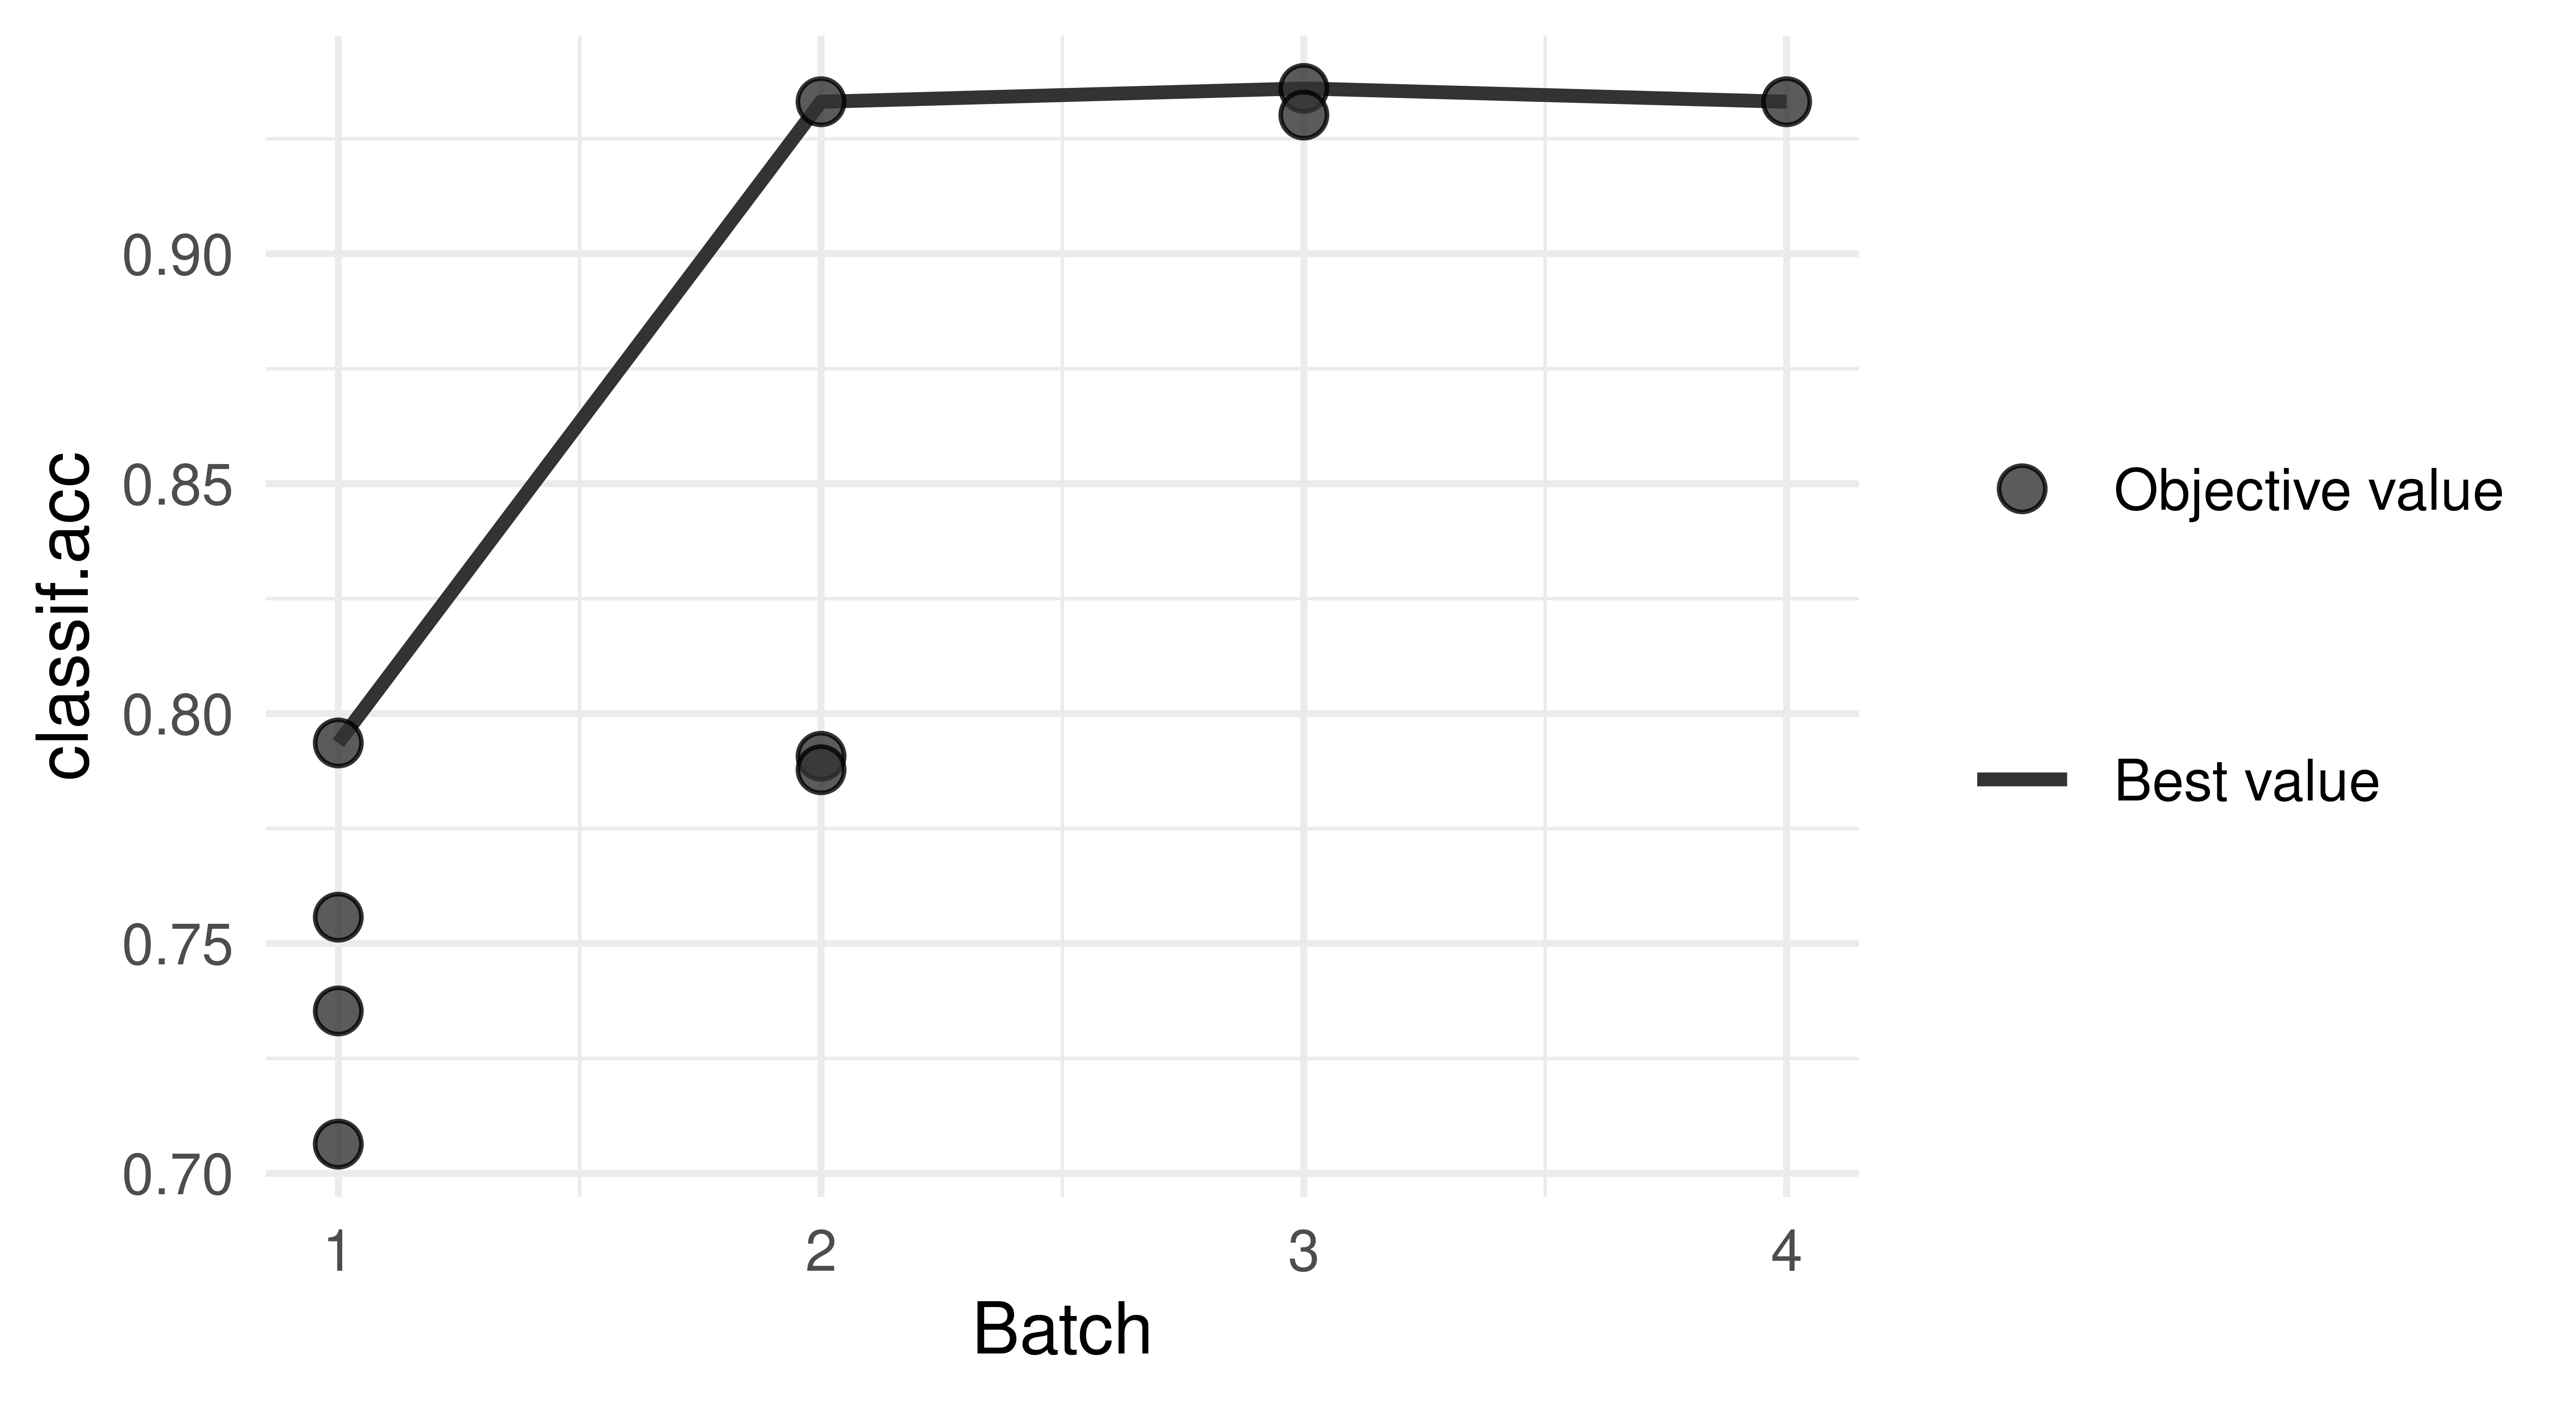 Scatter and line plot with "Batch" on the x-axis and "classif.acc" on the y-axis. Line shows improving performance from 1 to batch 2 then increases very slightly in batch 3 and decreases in 4, the values are in the printed instance archive.